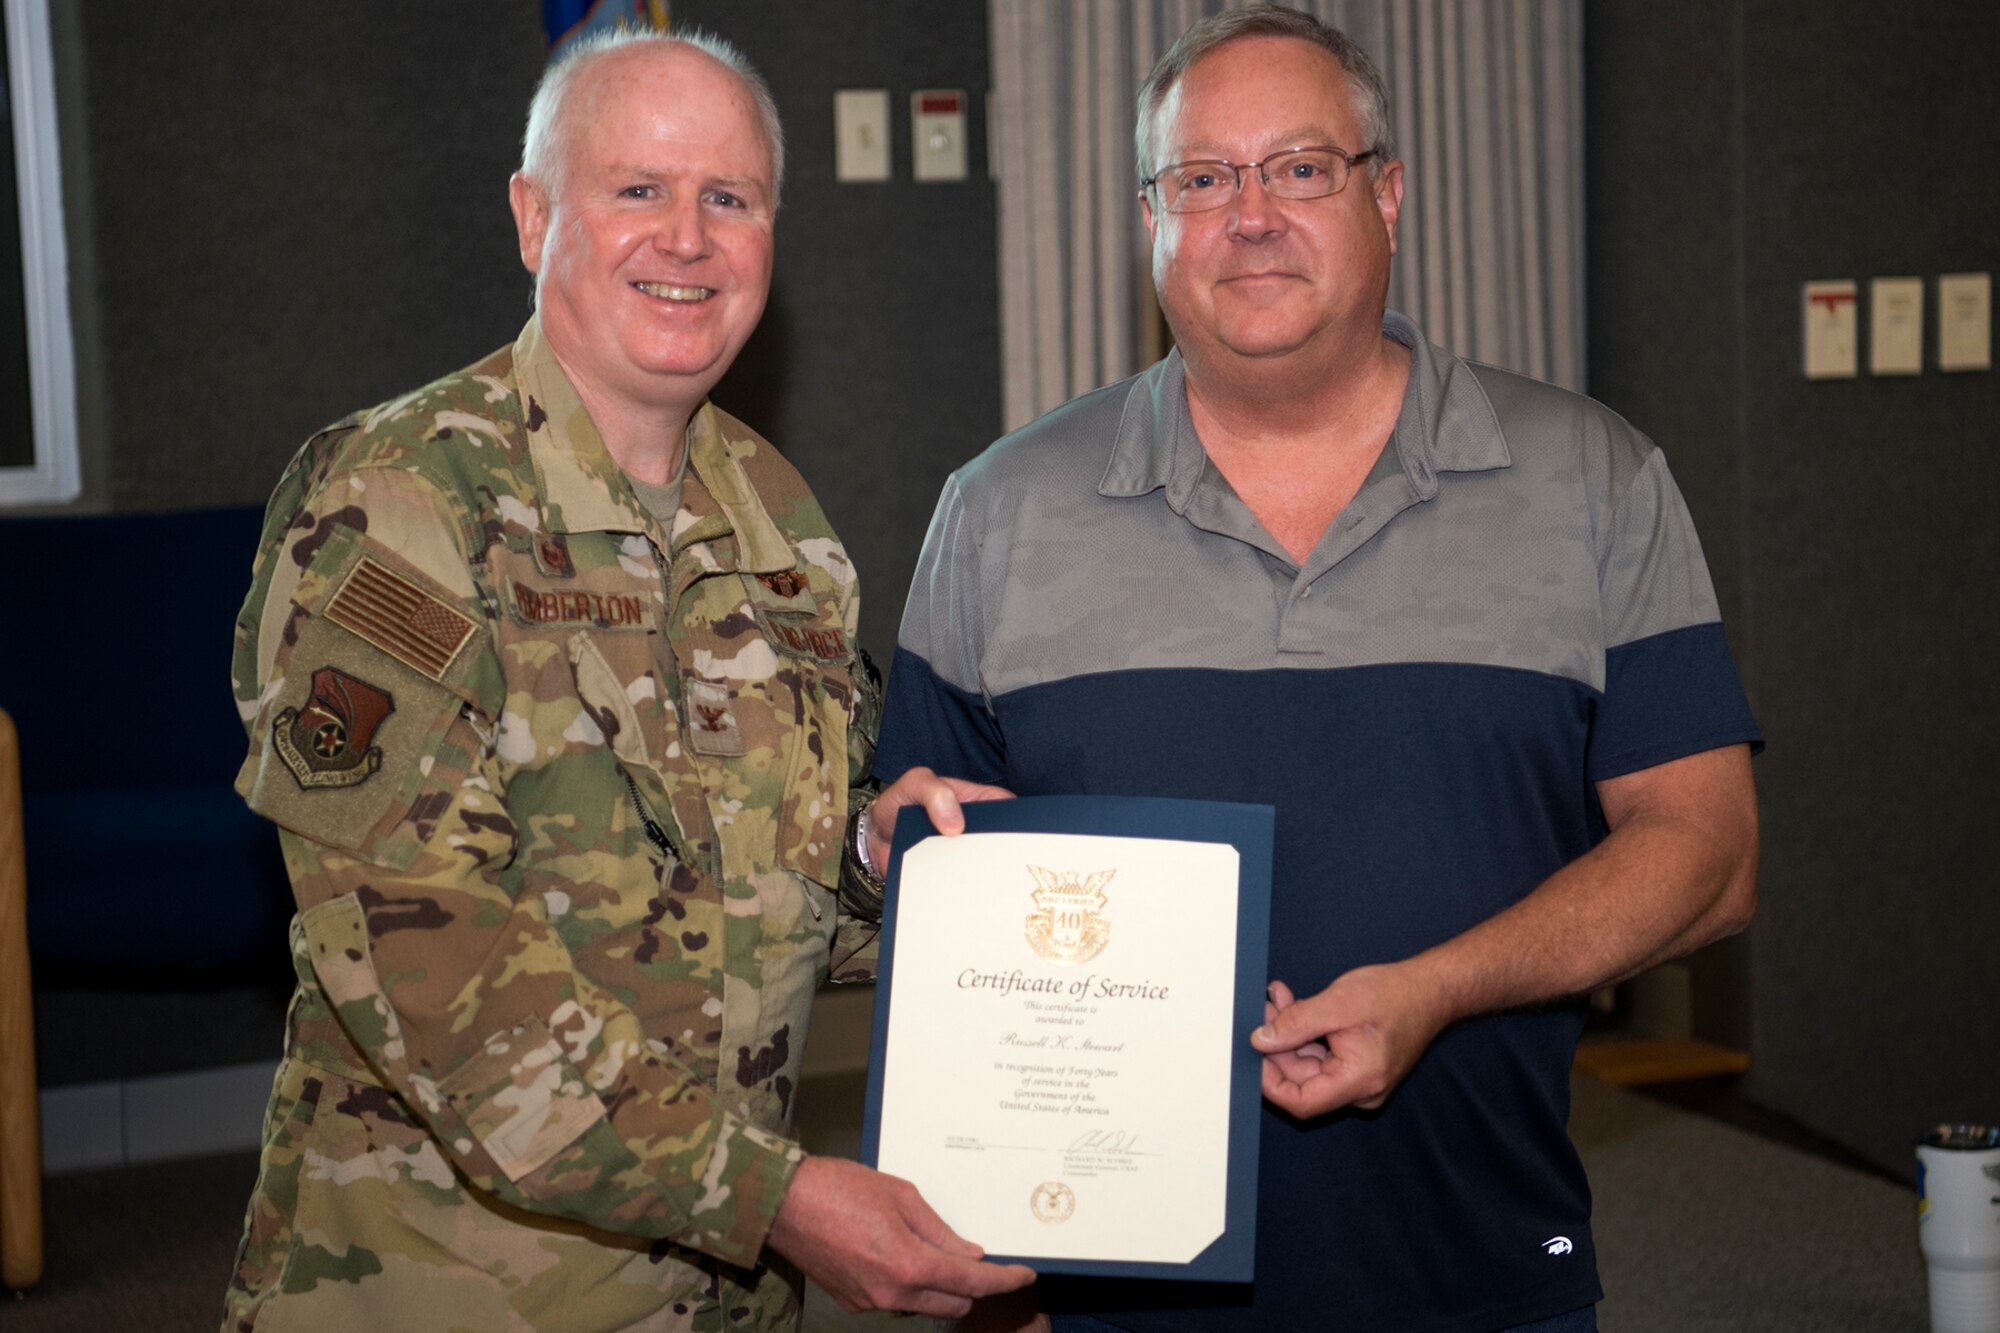 Col. Thom Pemberton, 434th Air Refueling Wing commander, left, presents Rusty Stewart, 434th Maintenance Squadron, a certificate recognizing his 40 years of federal service July 8, 2021. Employees were recognized during a civilian commander's call for 40, 30, 20, and 10 years of service. (U.S. Air Force photo by Douglas Hays)